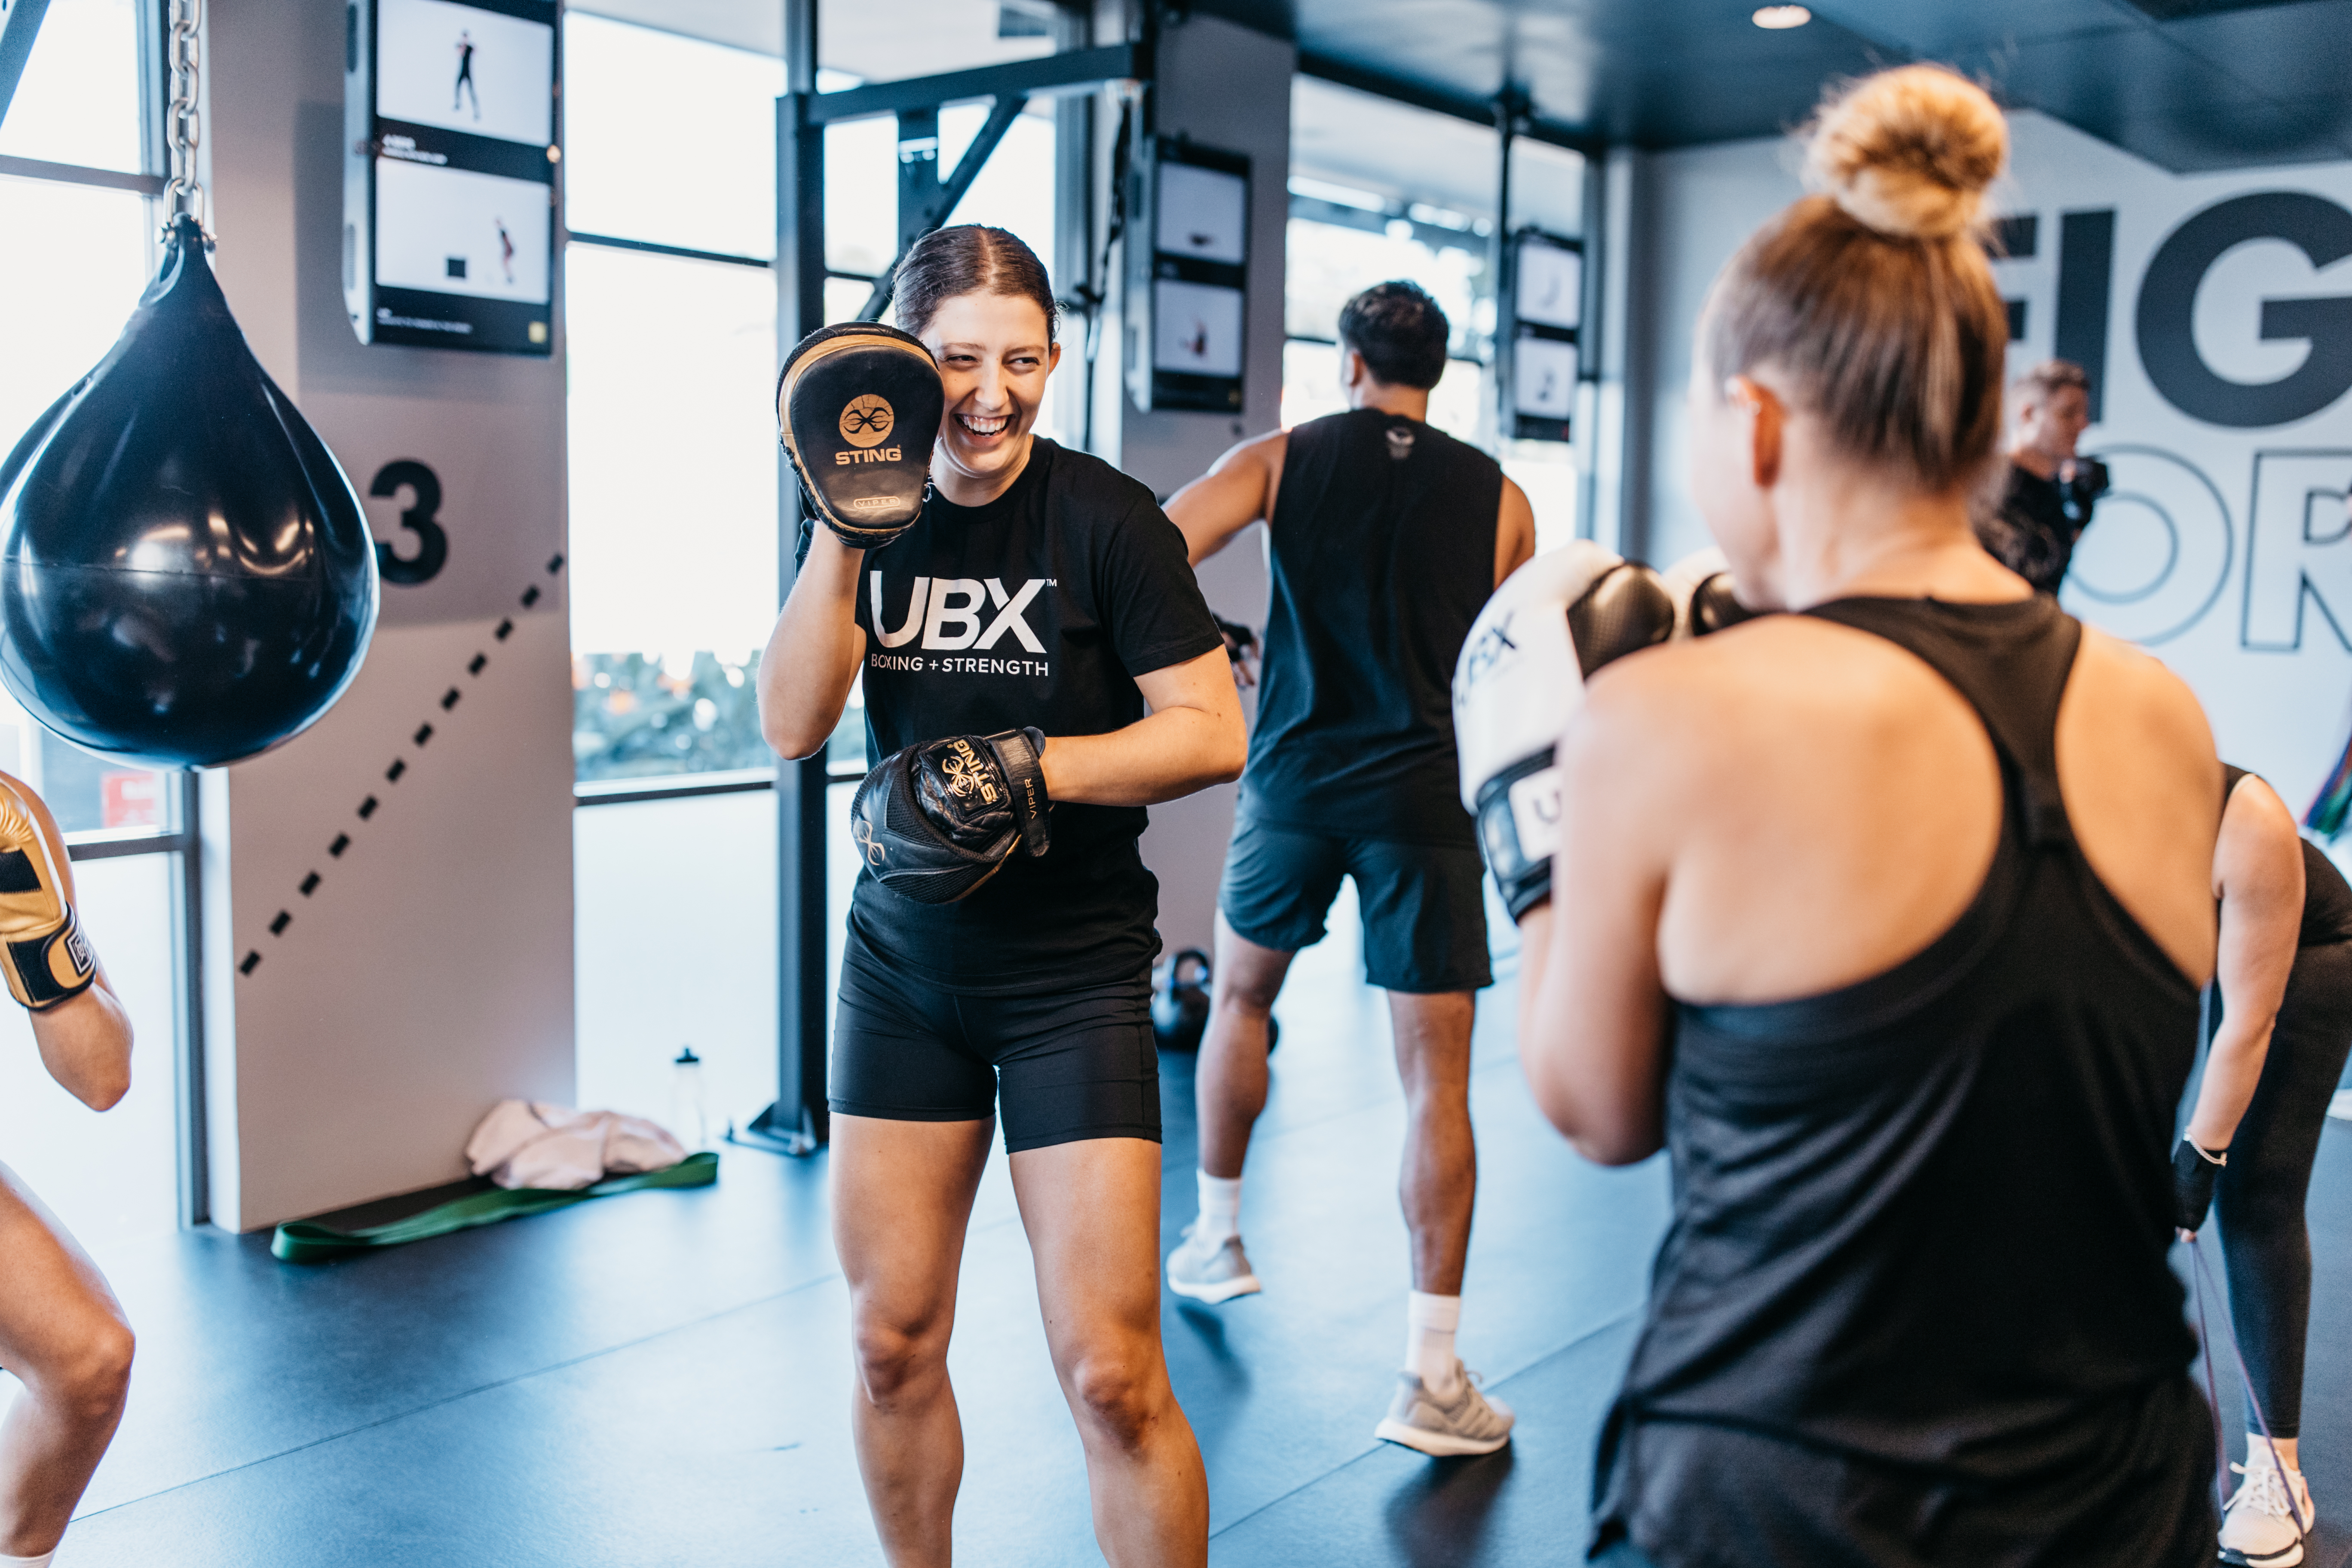 Boxing for Fitness: Knocking Out Your Insecurities at UBX